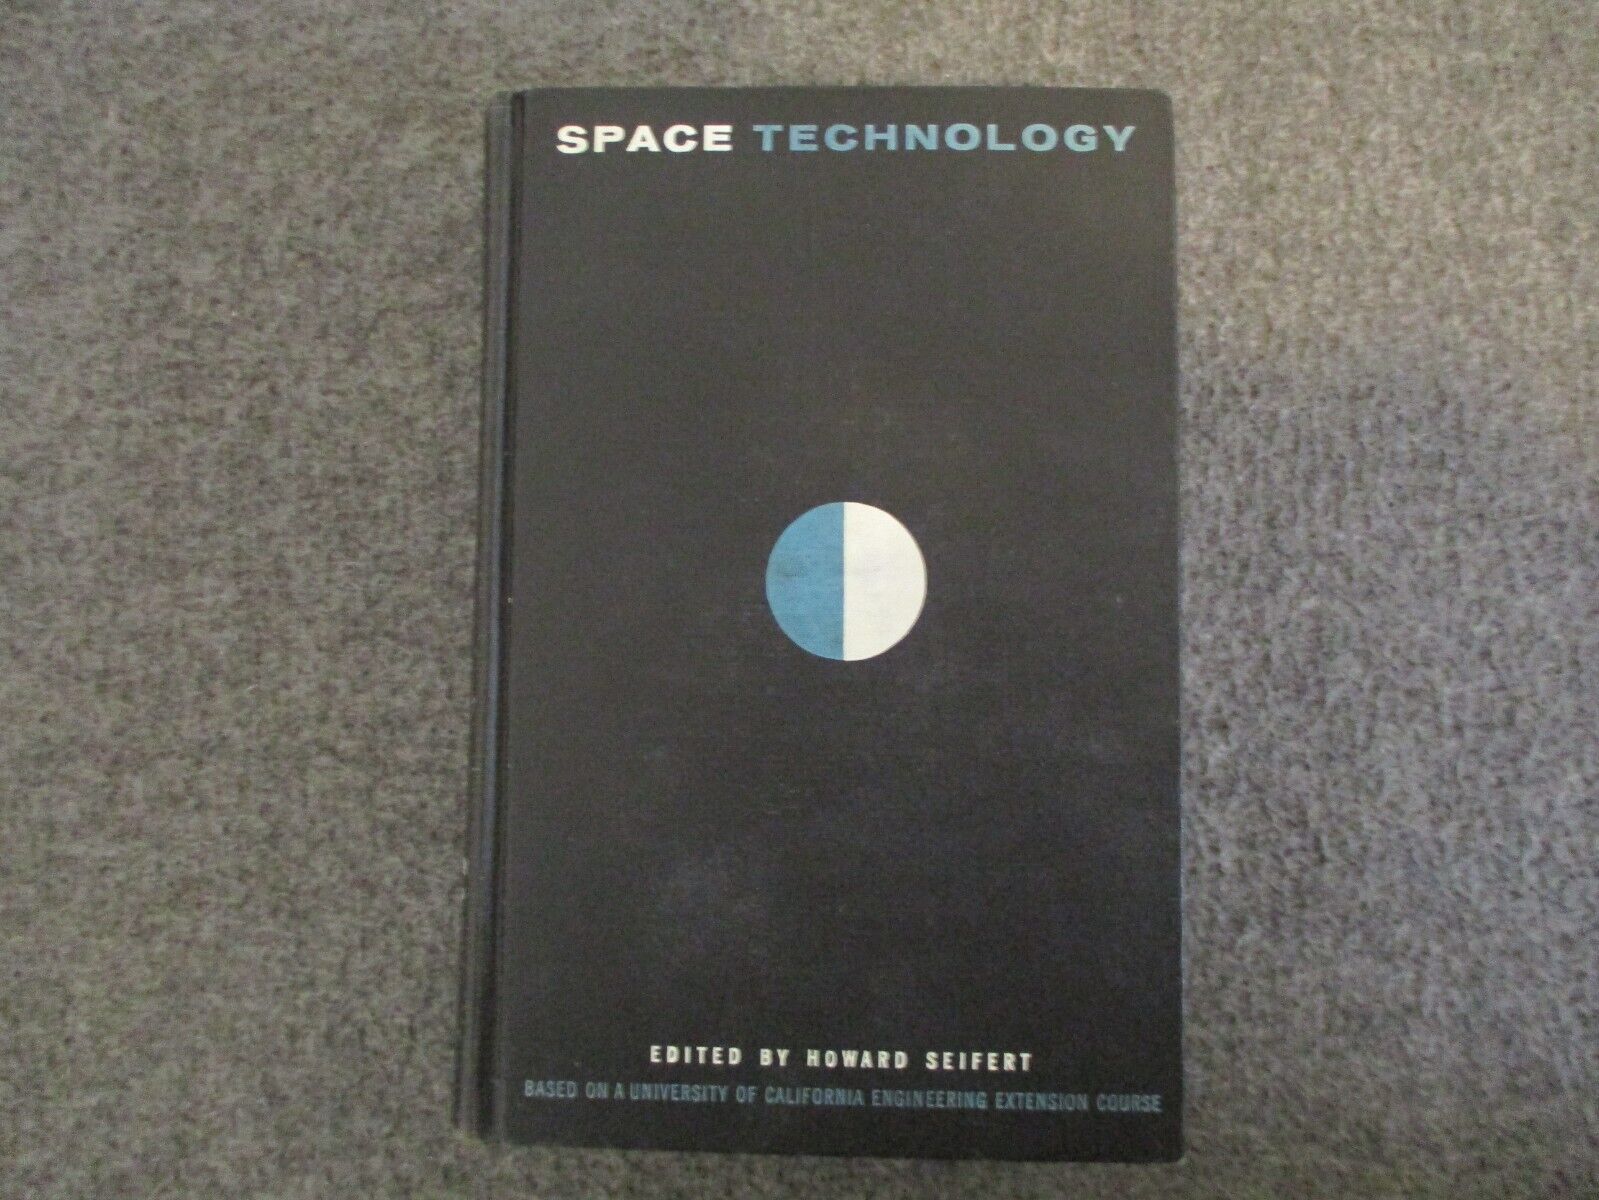 SPACE TECHNOLOGY HARDCOVER by HOWARD SEIFERT LOCKHEED SPACE CO LIBRARY COPY 1959